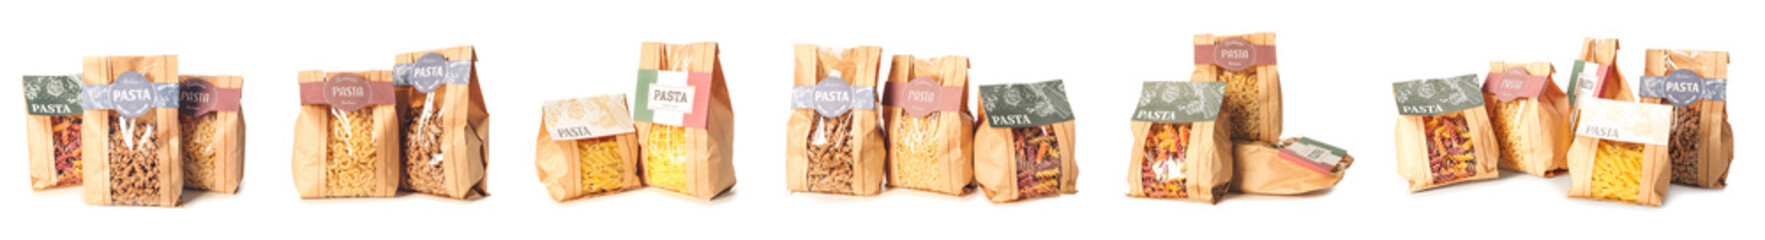 Set of different types of Italian pasta in bags on white background